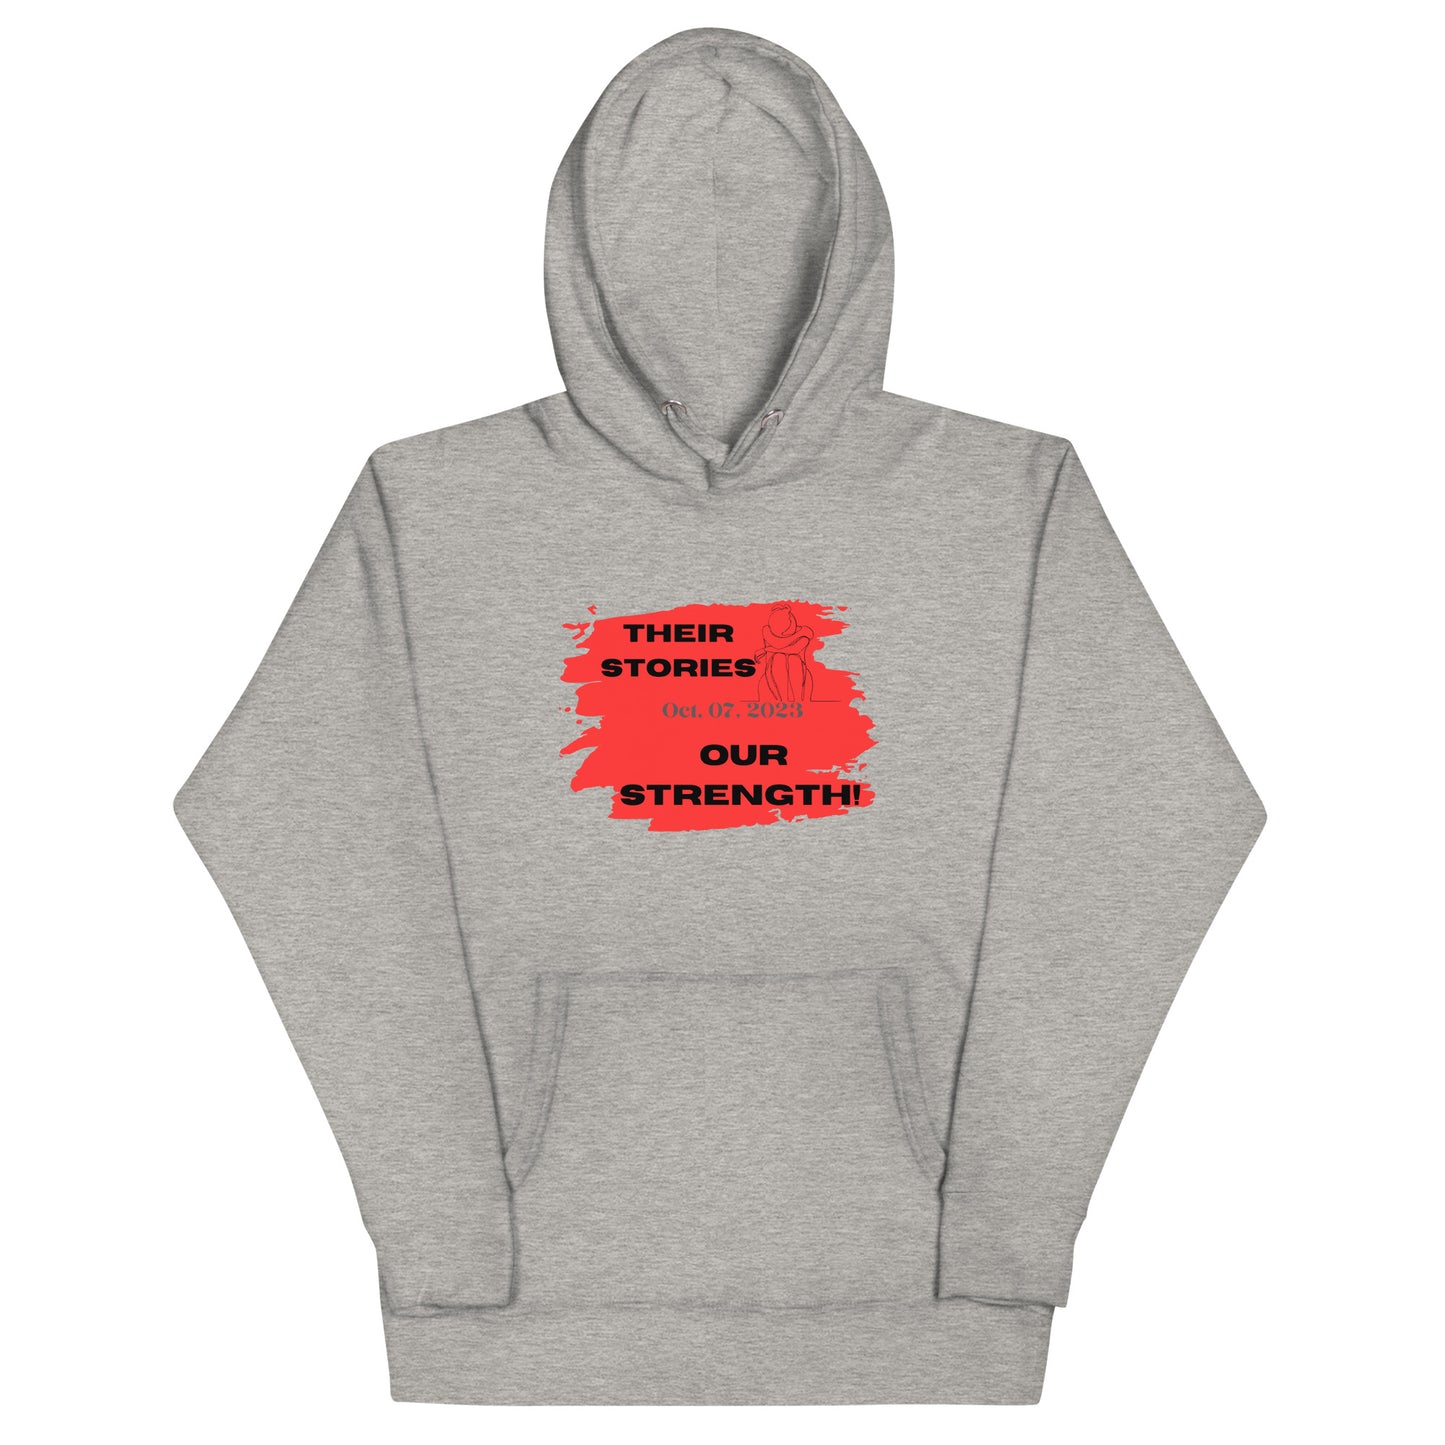 Their stories, our strength - Unisex Hoodie (6 colors)